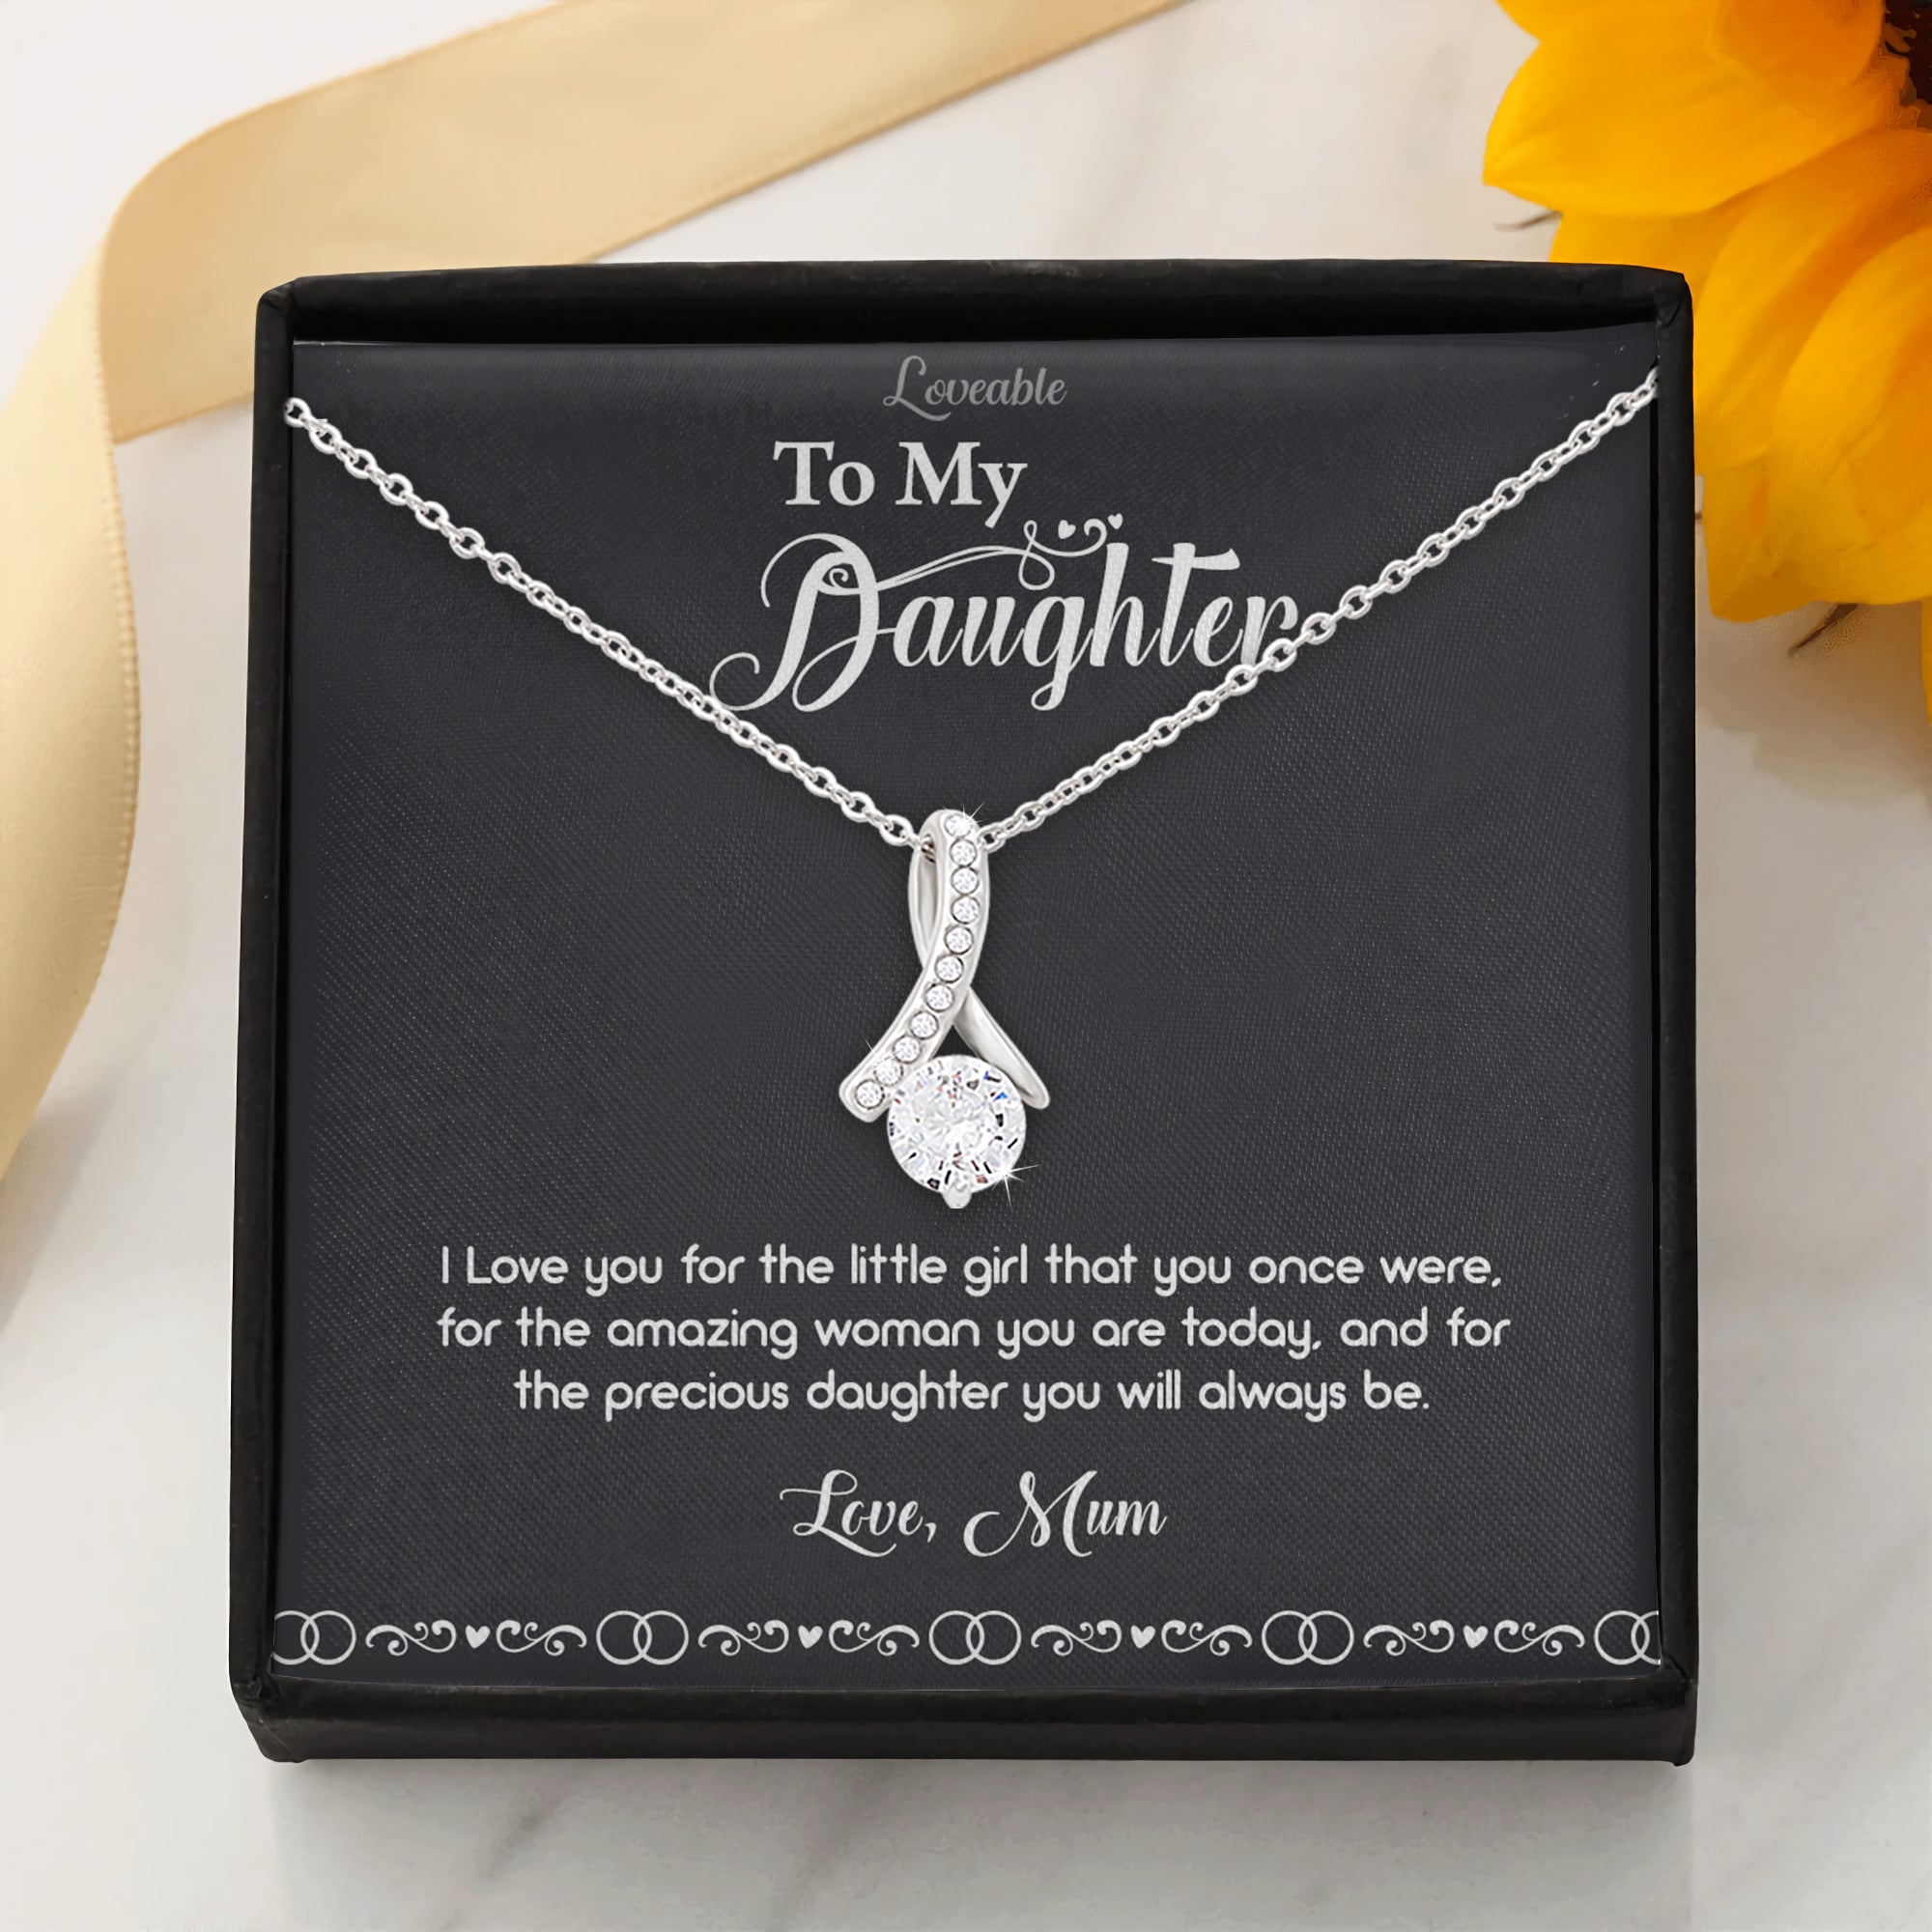 I love you for the little girl that you once were  - Birthday Gift for Daughter